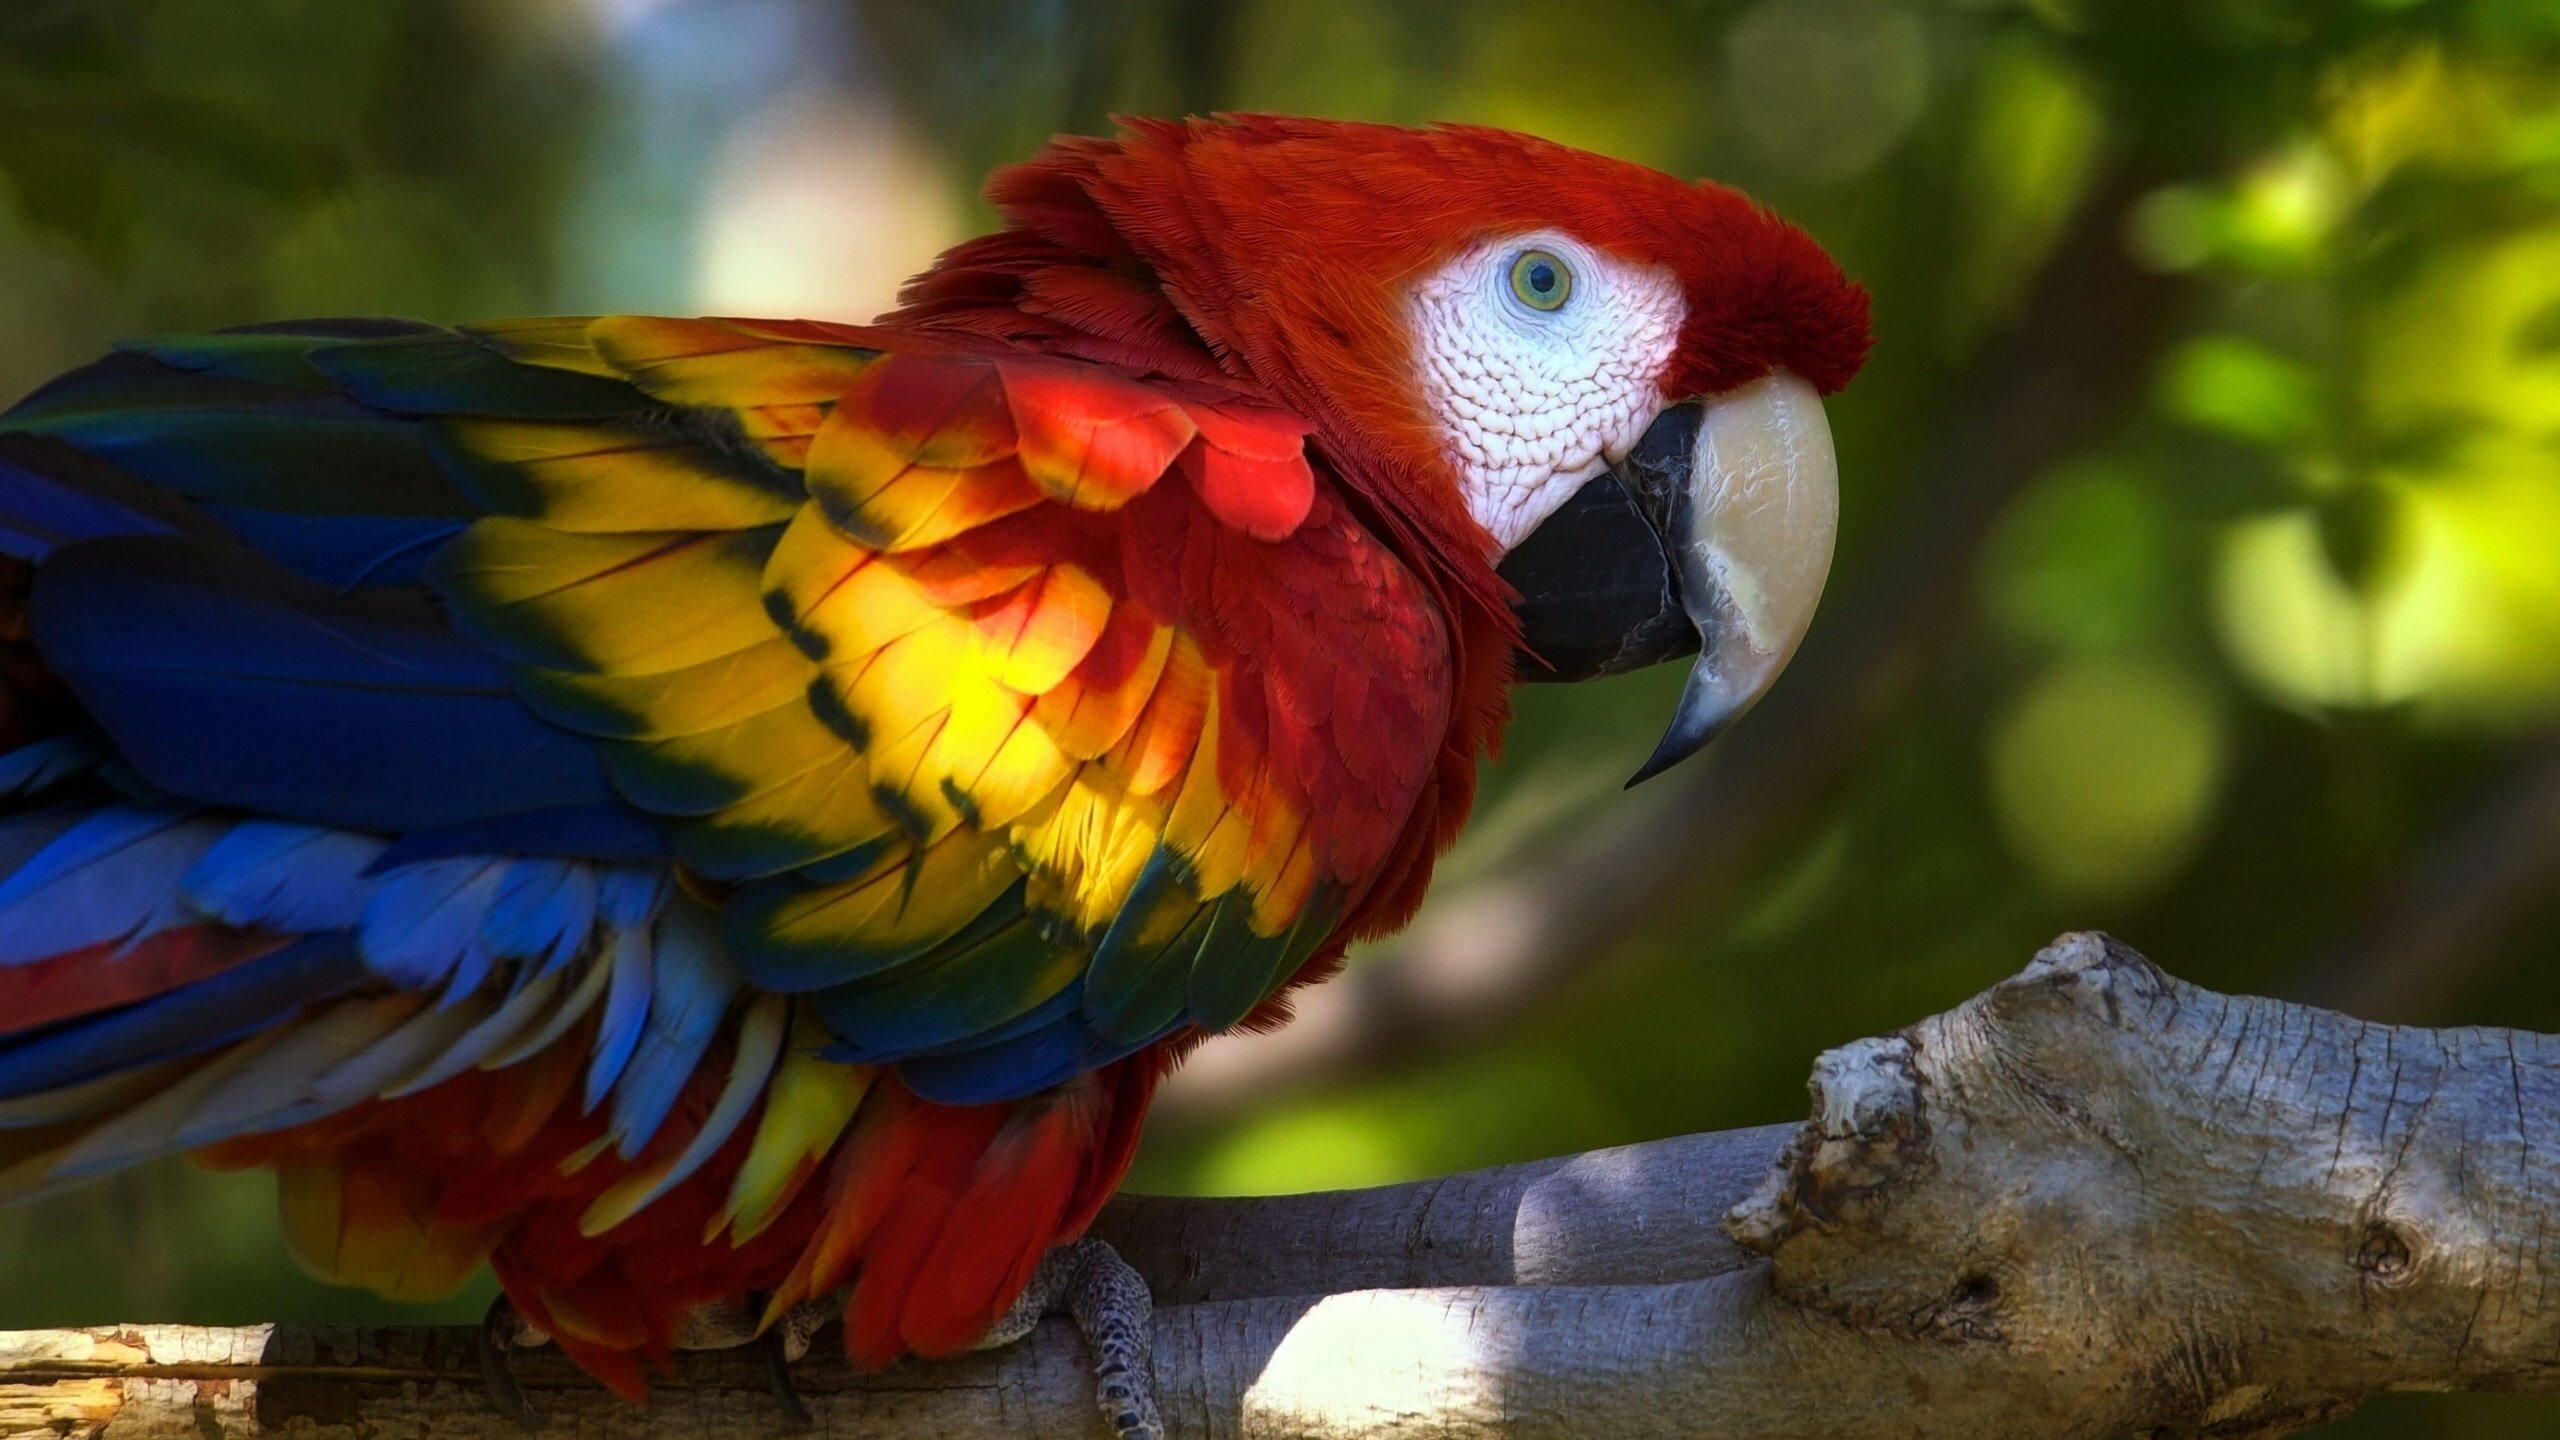 Bird That Has Blue And Red And Yellow - HD Wallpaper 